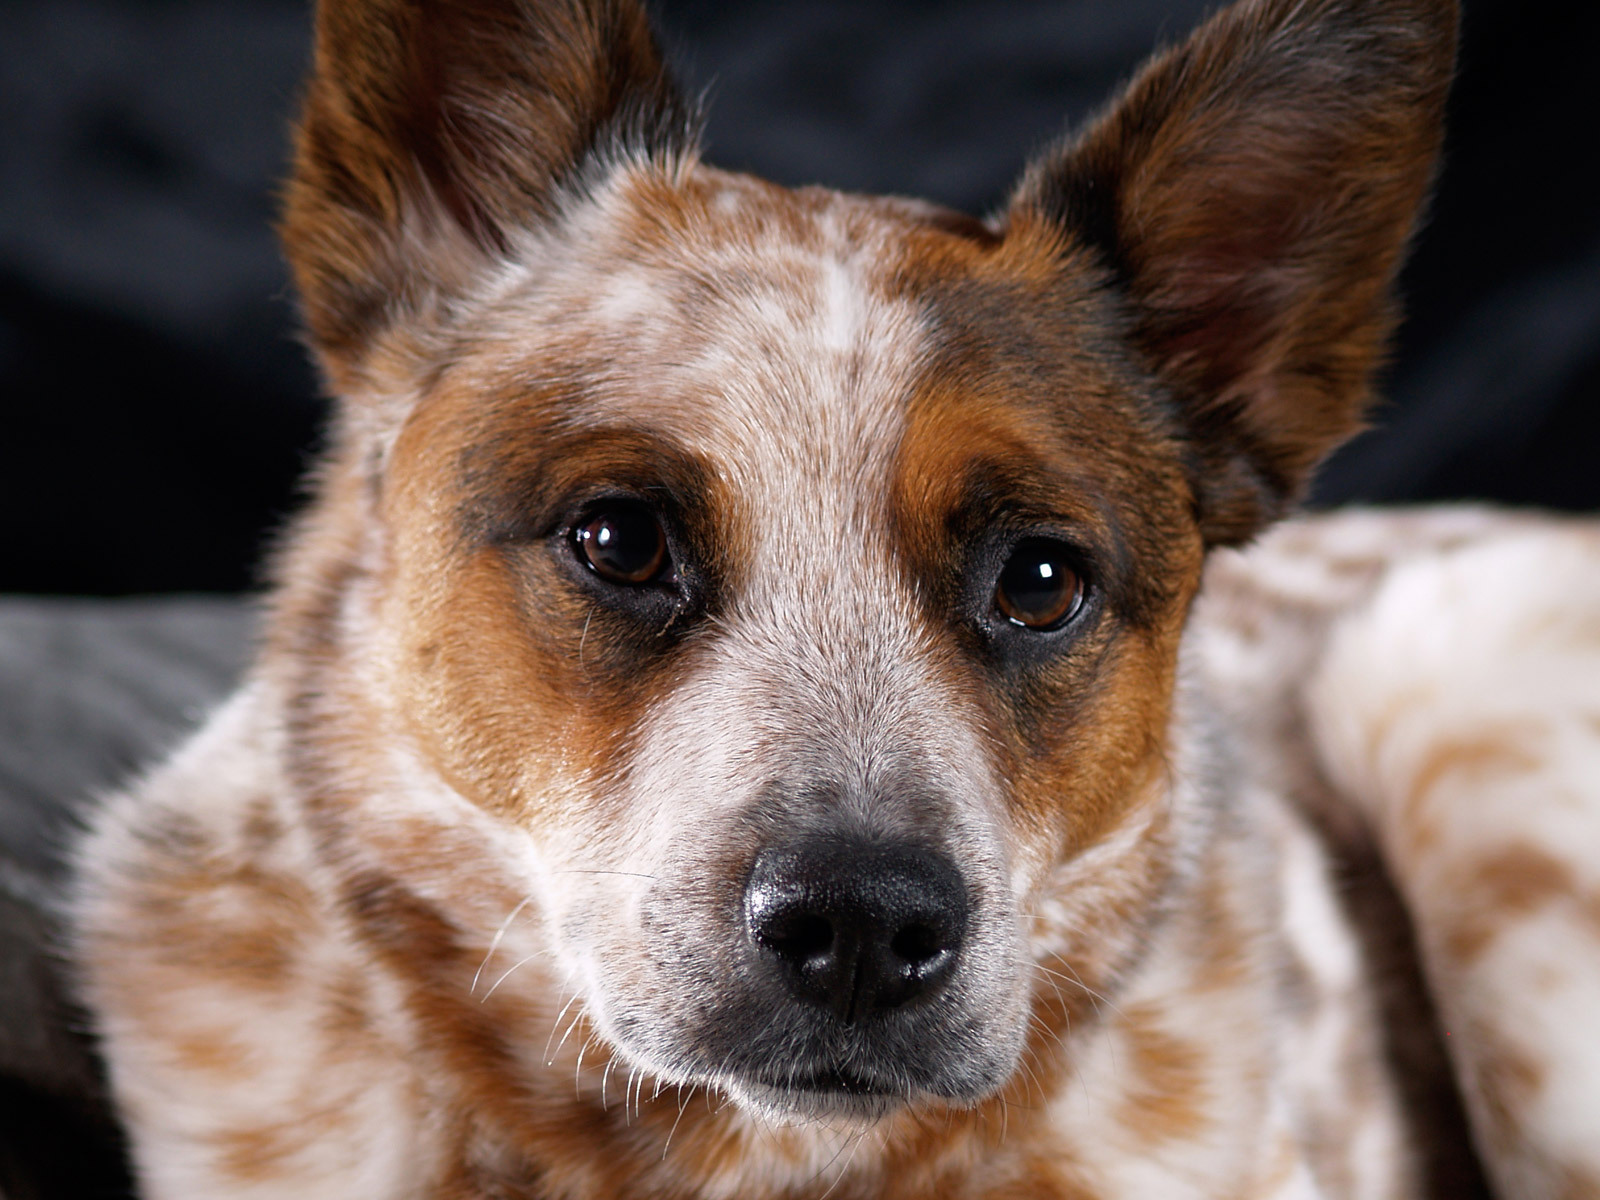 Australian Cattle Dog close-up wallpapers and images - wallpapers